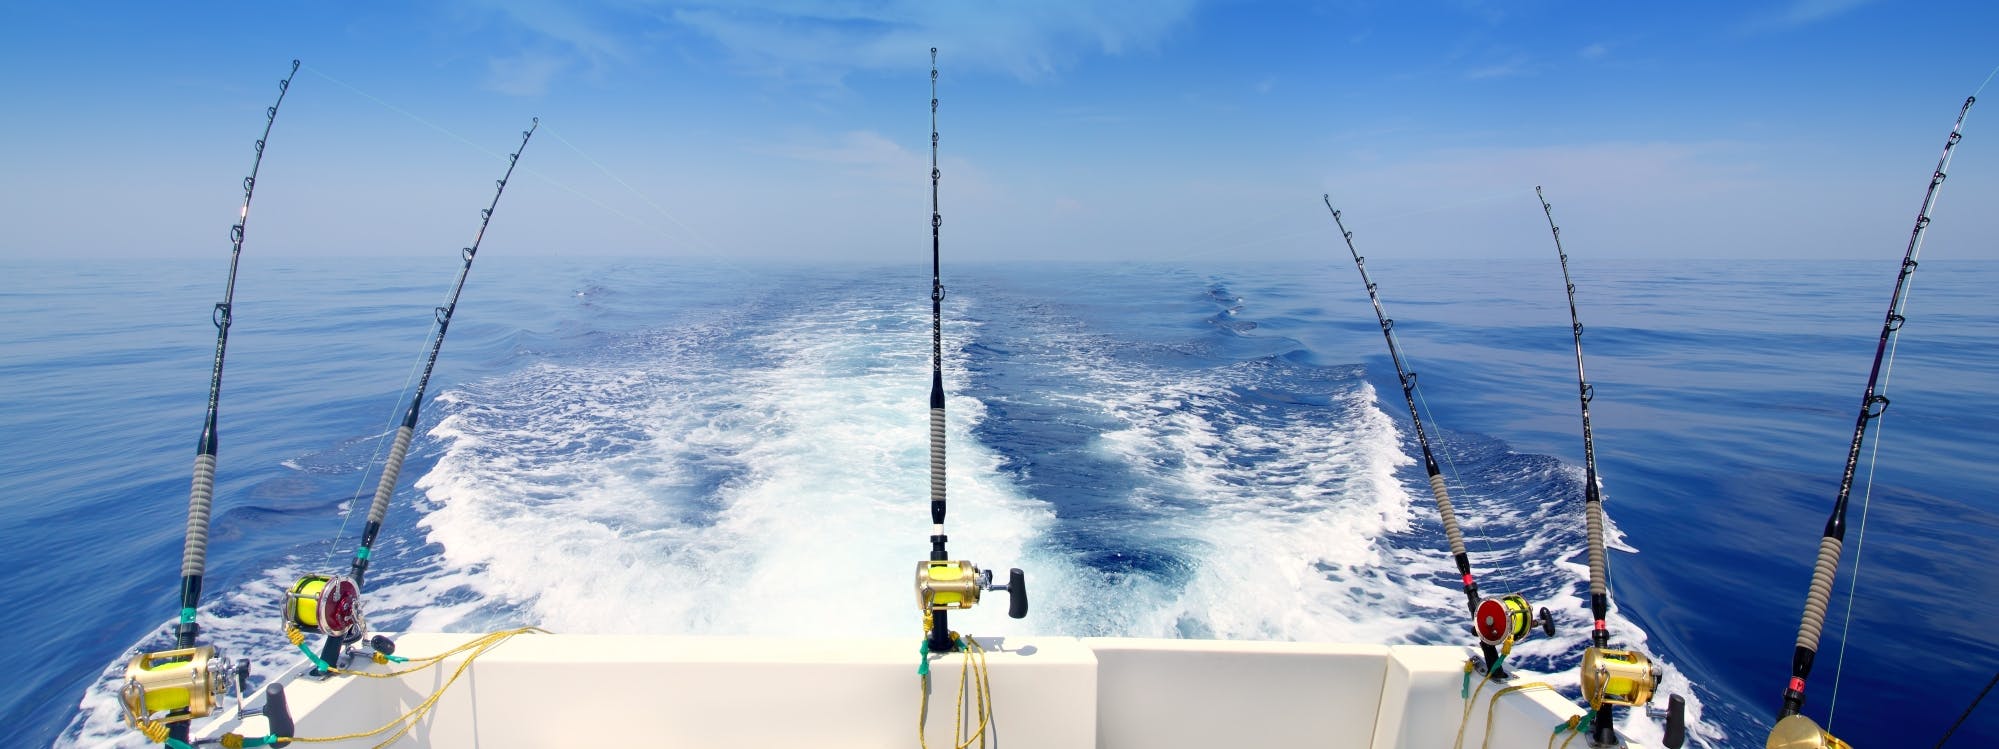 Half-day fishing boat experience from Puerto Colon Tenerife Musement